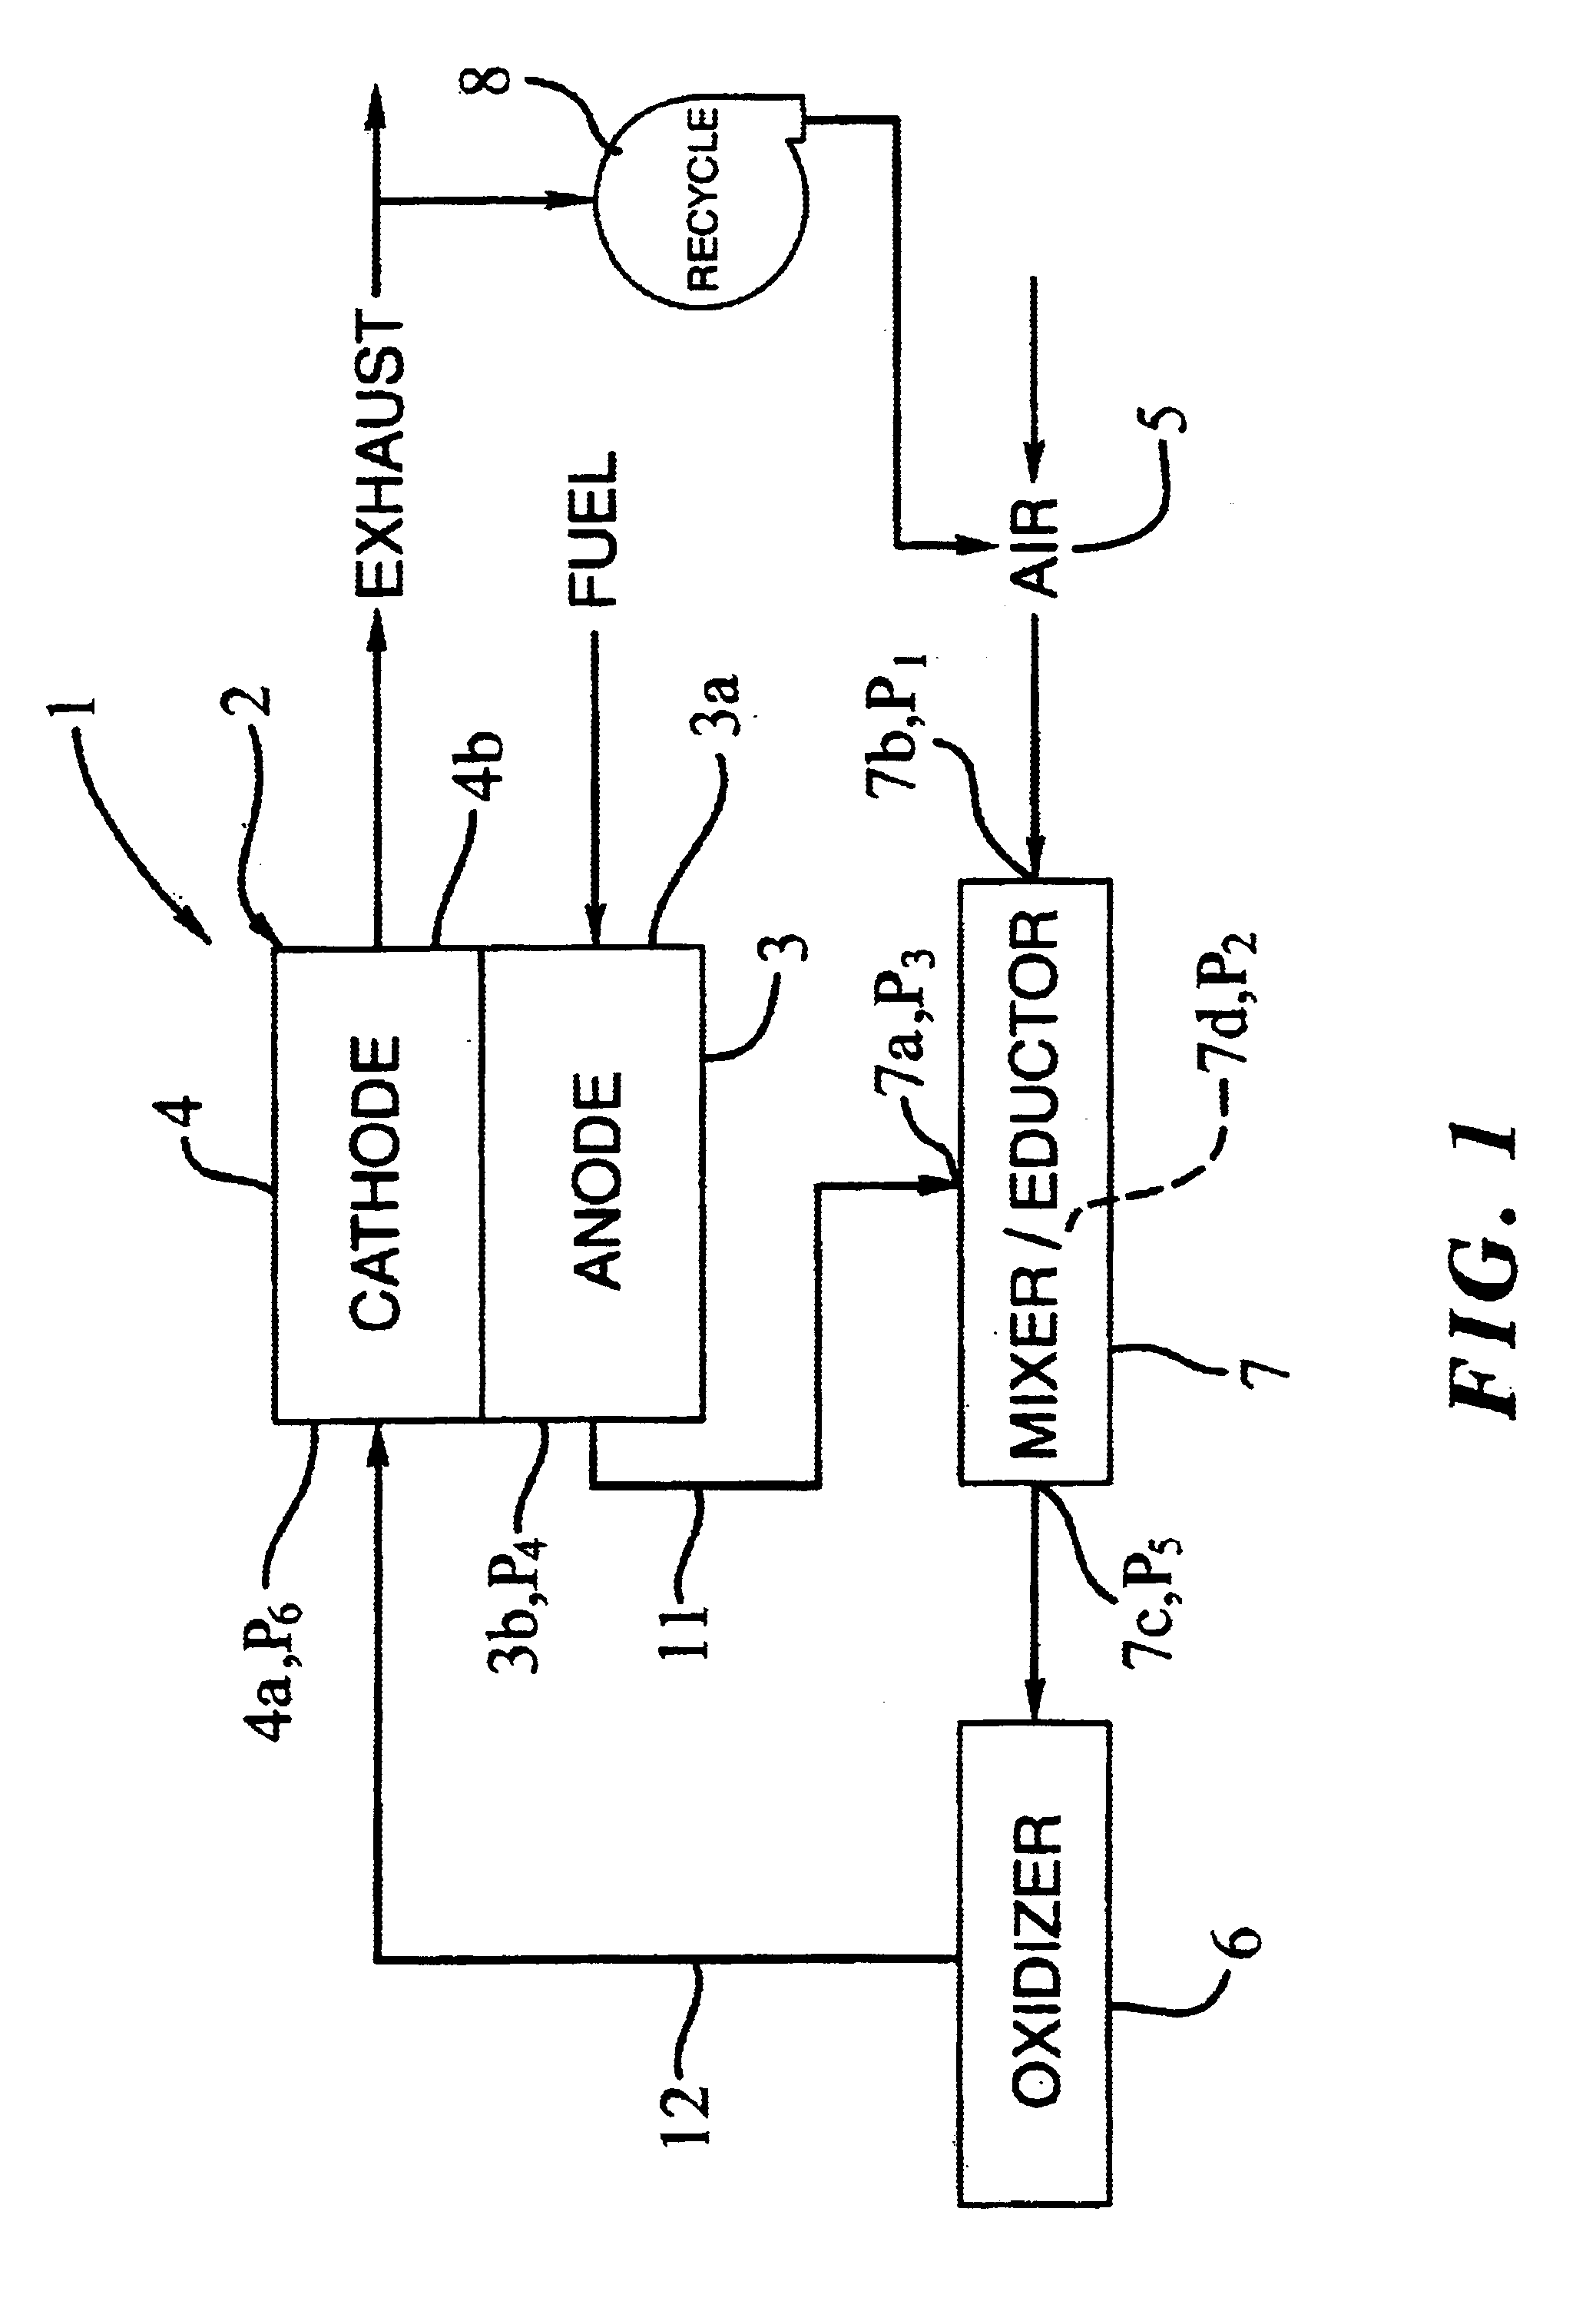 Fuel cell system with mixer/eductor